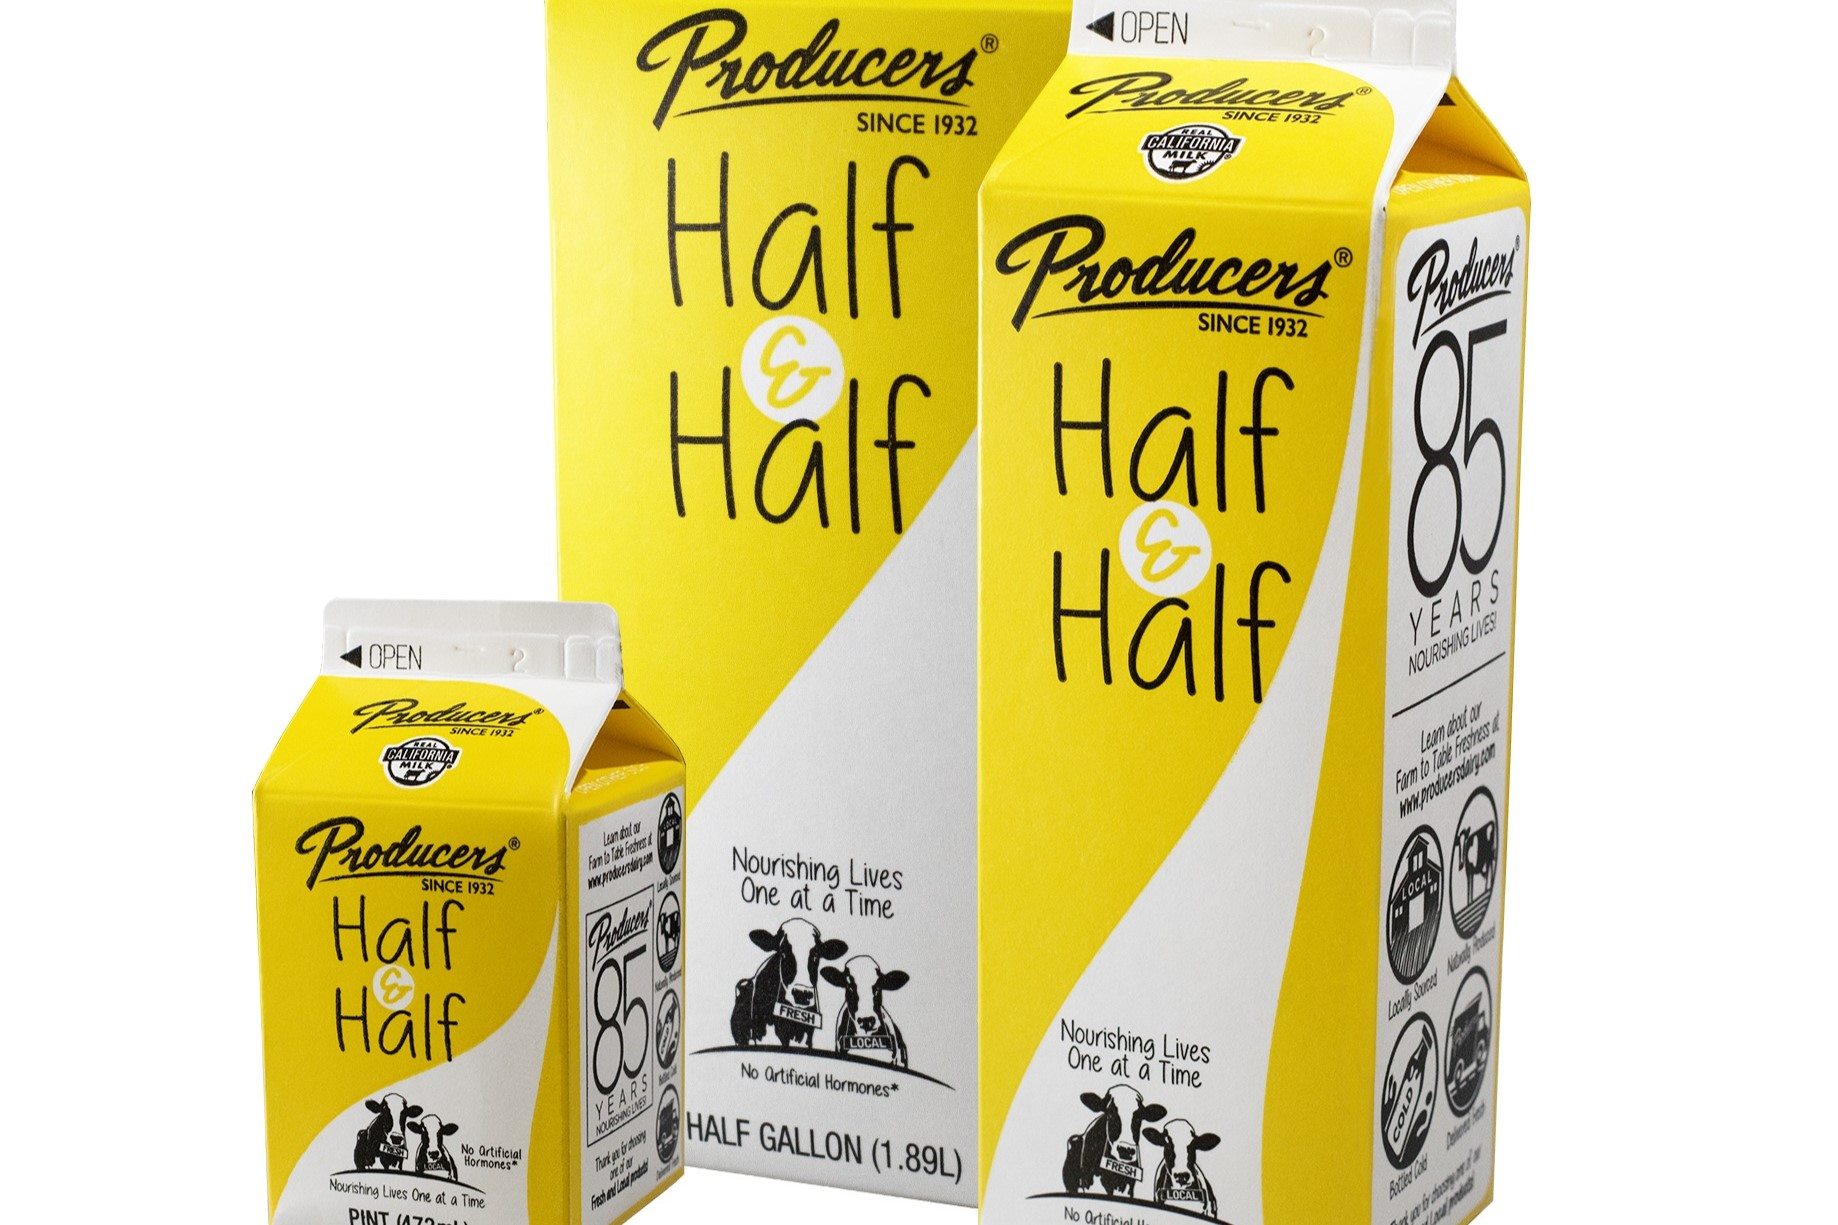 You Won't Believe What Happened When I Froze A Carton Of Half And Half!